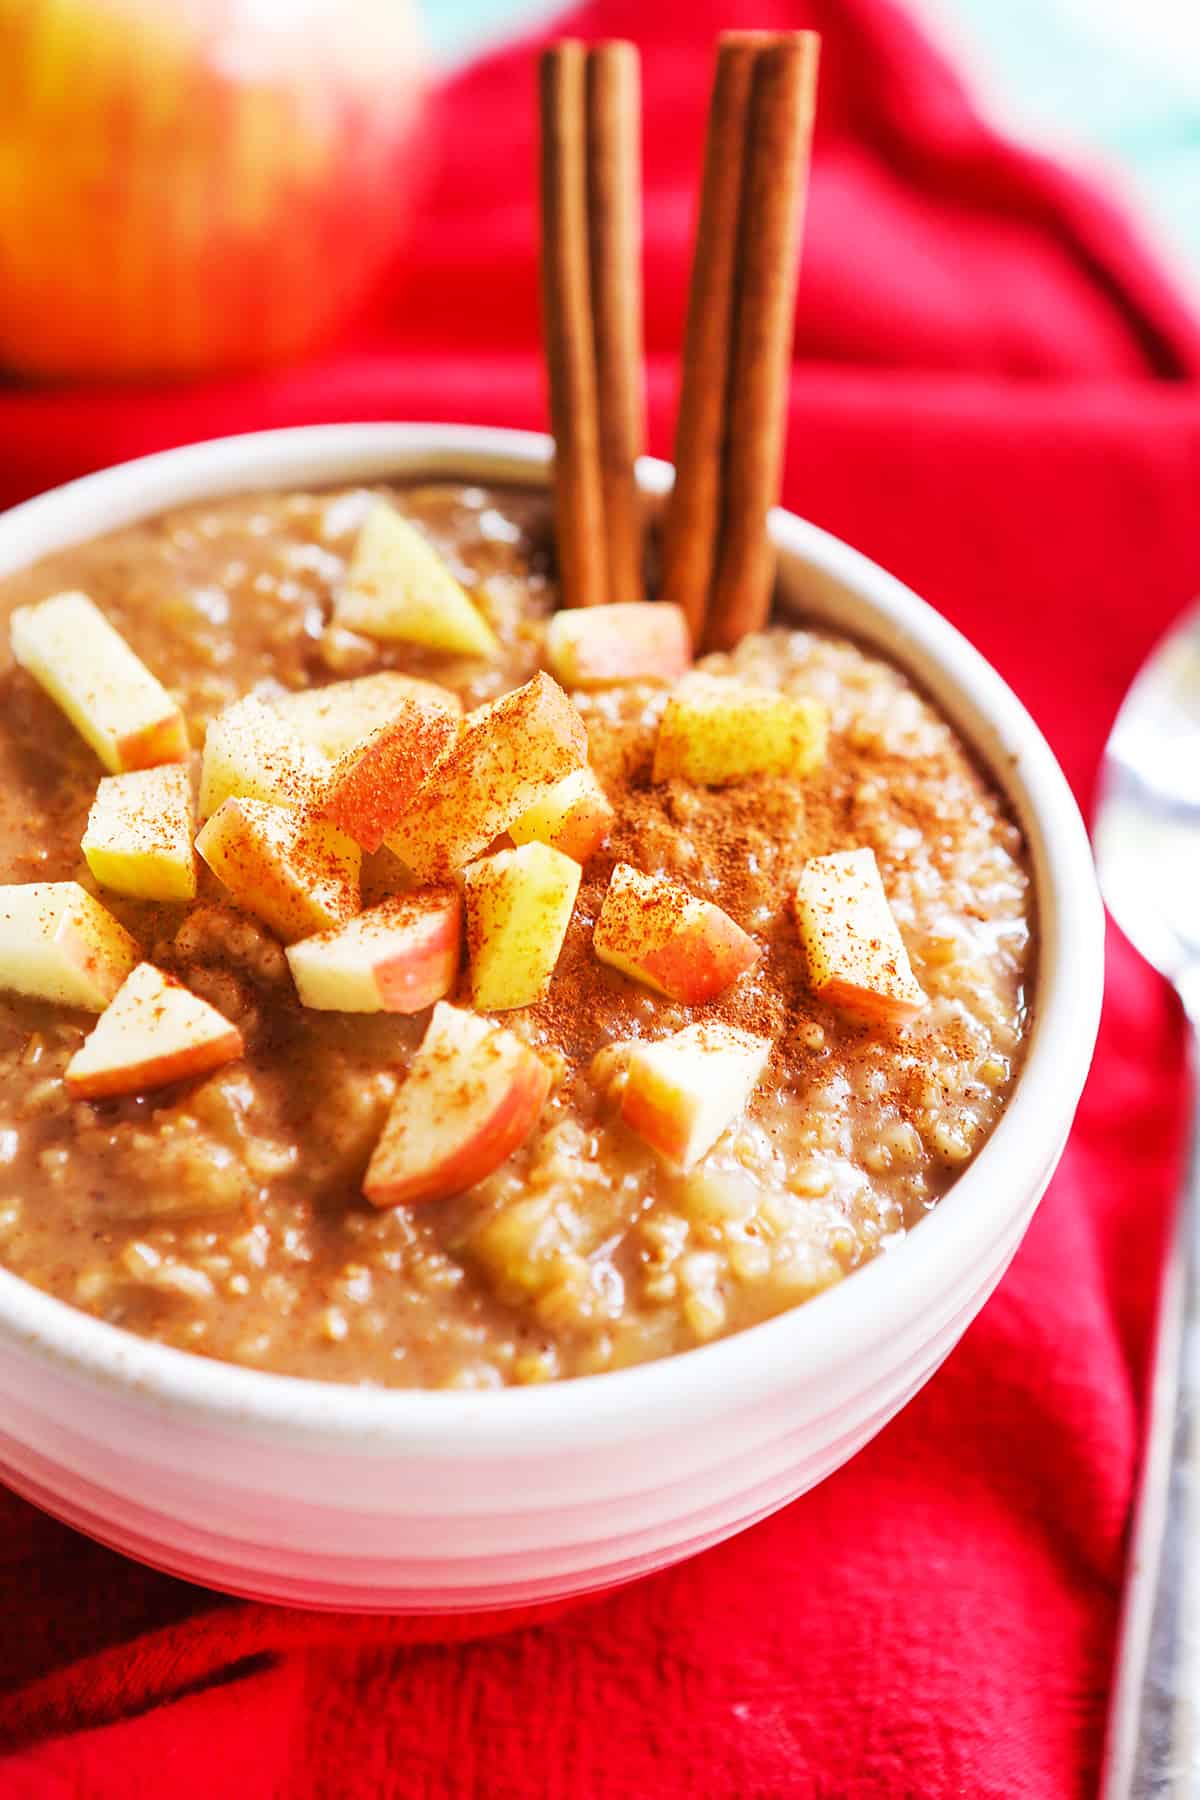 Bowl of apple cinnamon oatmeal with 2 cinnamon sticks inserted into the bowl.